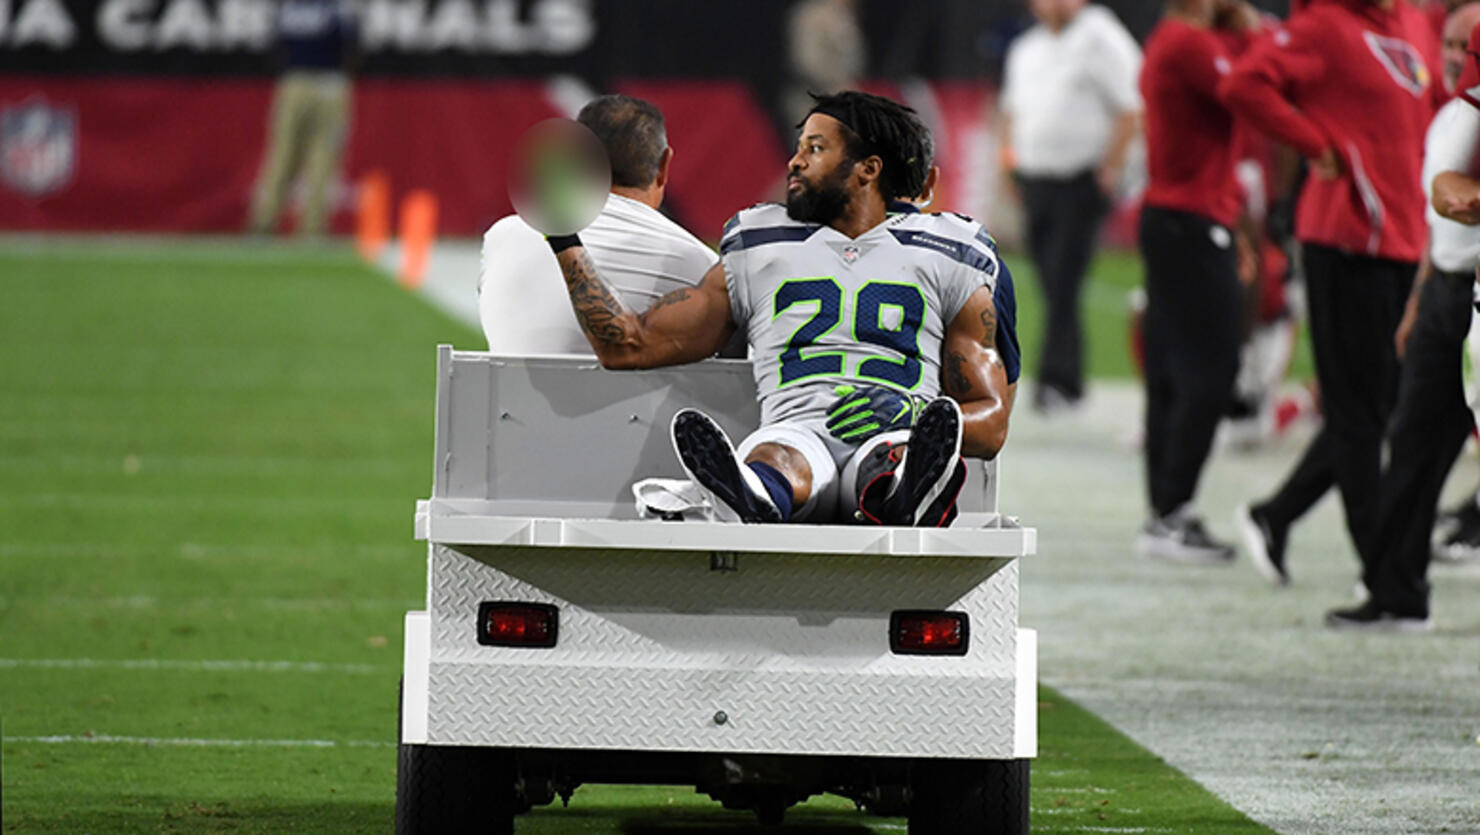  Defensive back Earl Thomas #29 of the Seattle Seahawks gestures as he leaves the field on a cart after being injured during the fourth quarter against the Arizona Cardinals